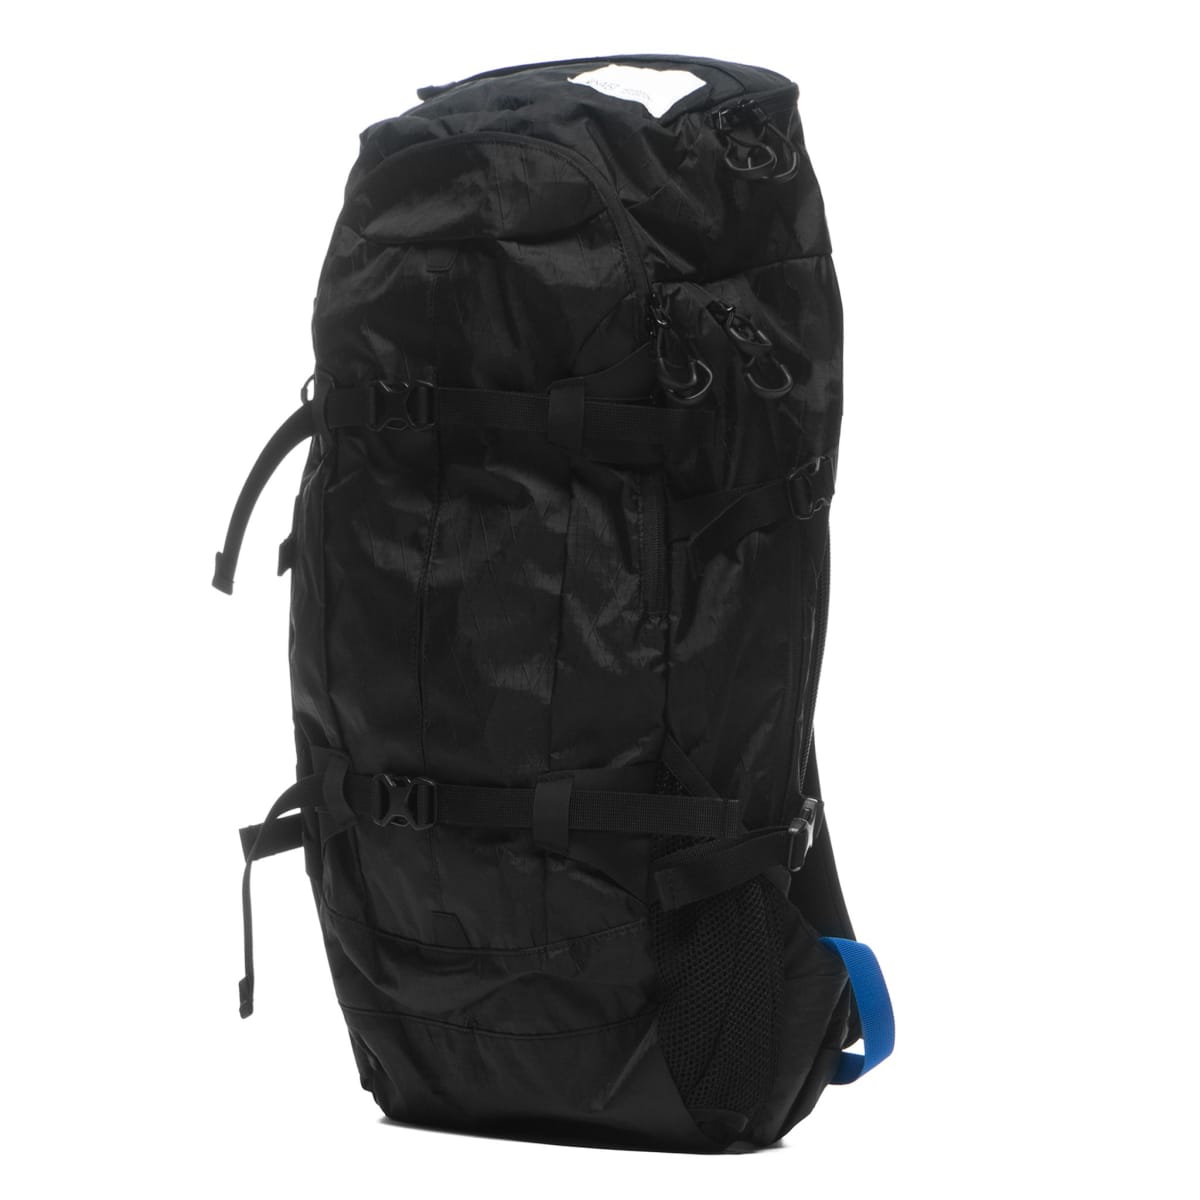 Burton's AK457 line releases a capsule of rugged X-Pac bags - Acquire